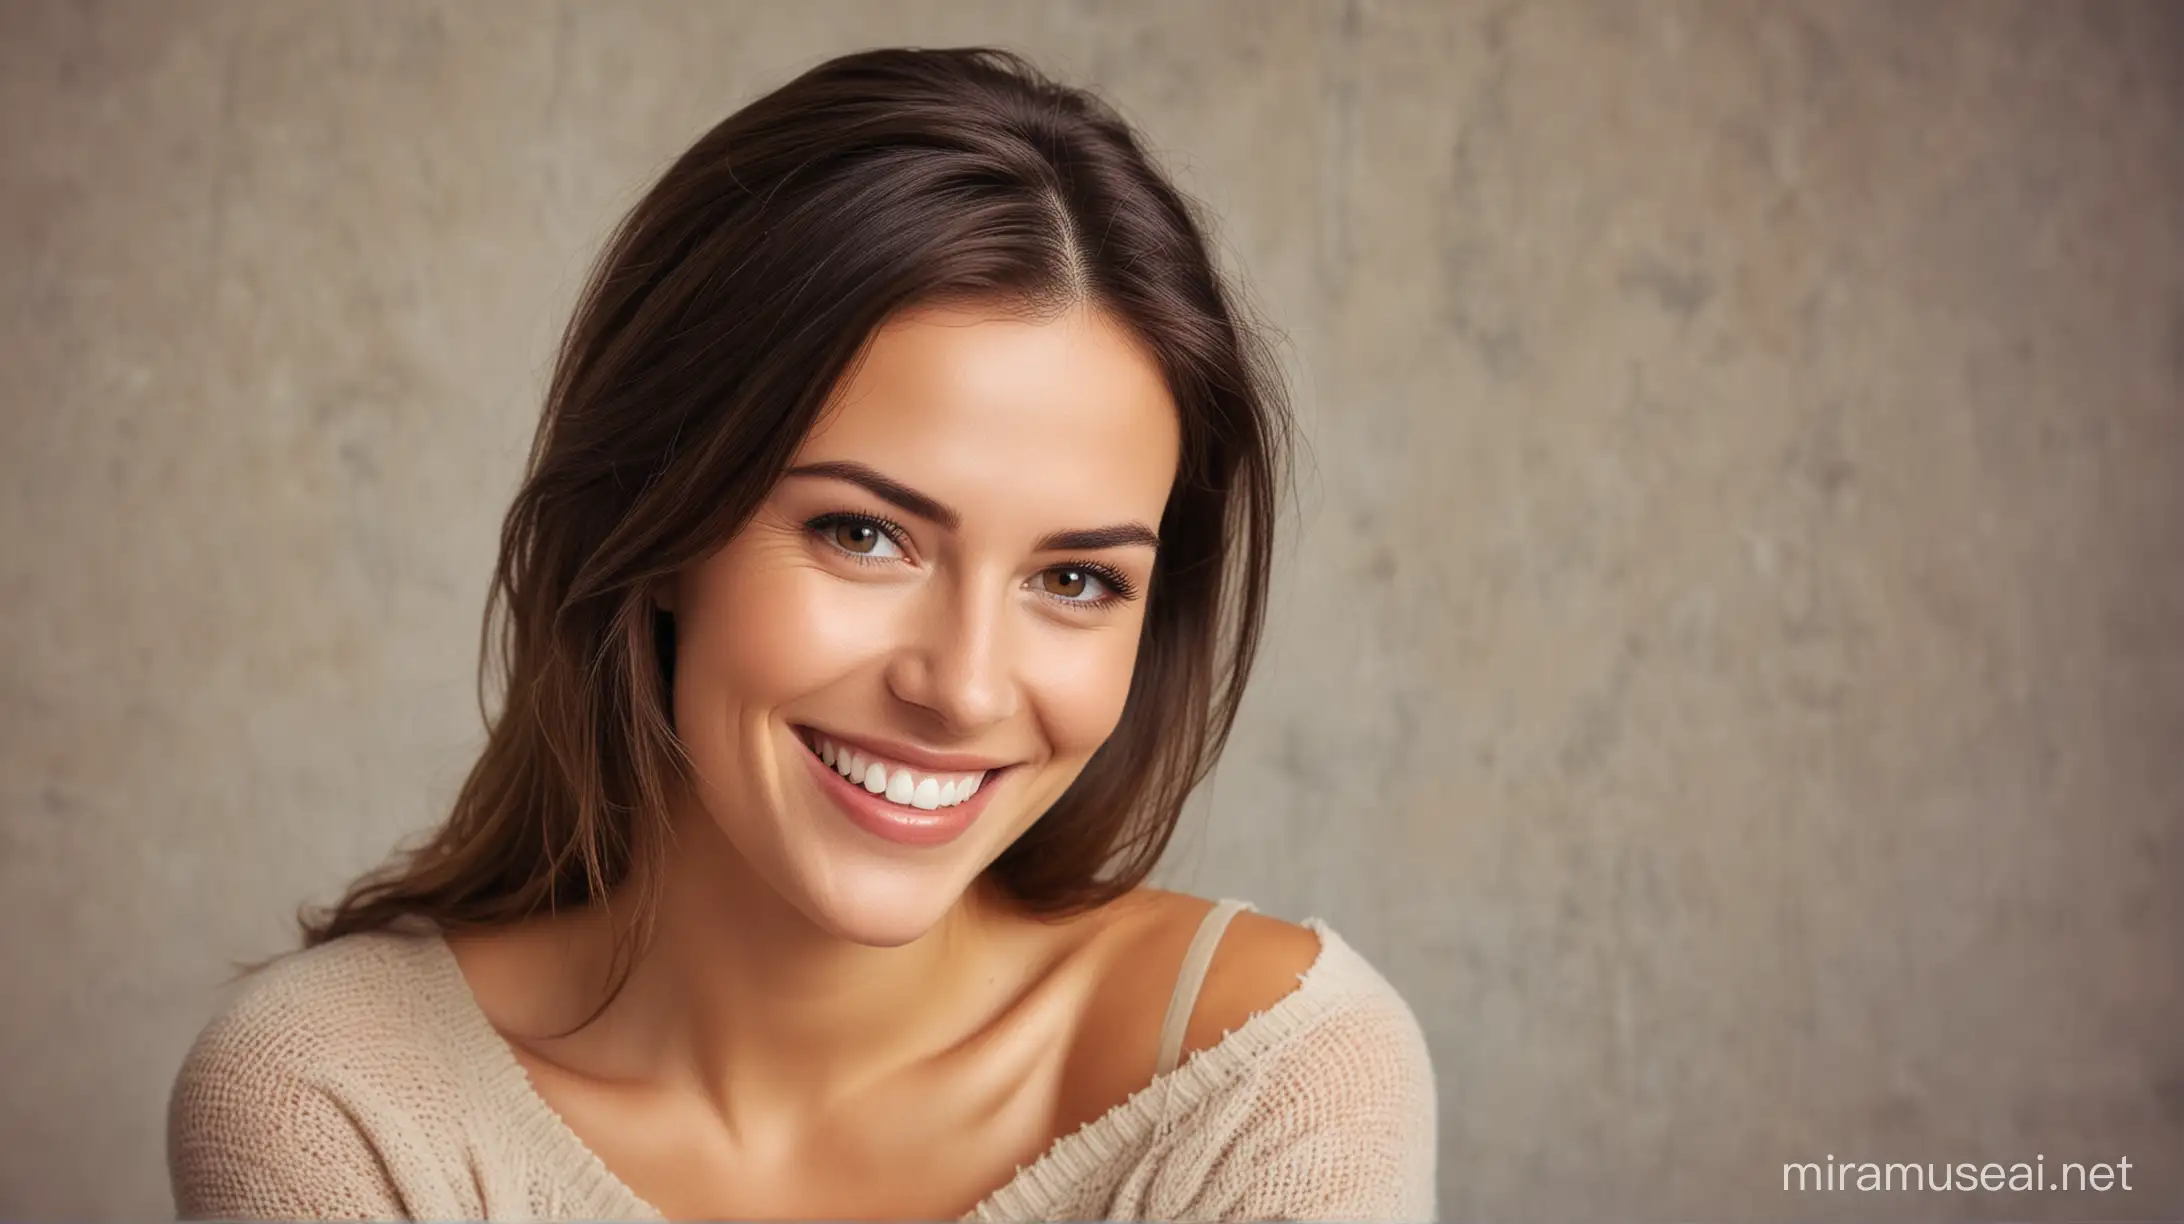 Charming Woman Smiling Radiantly